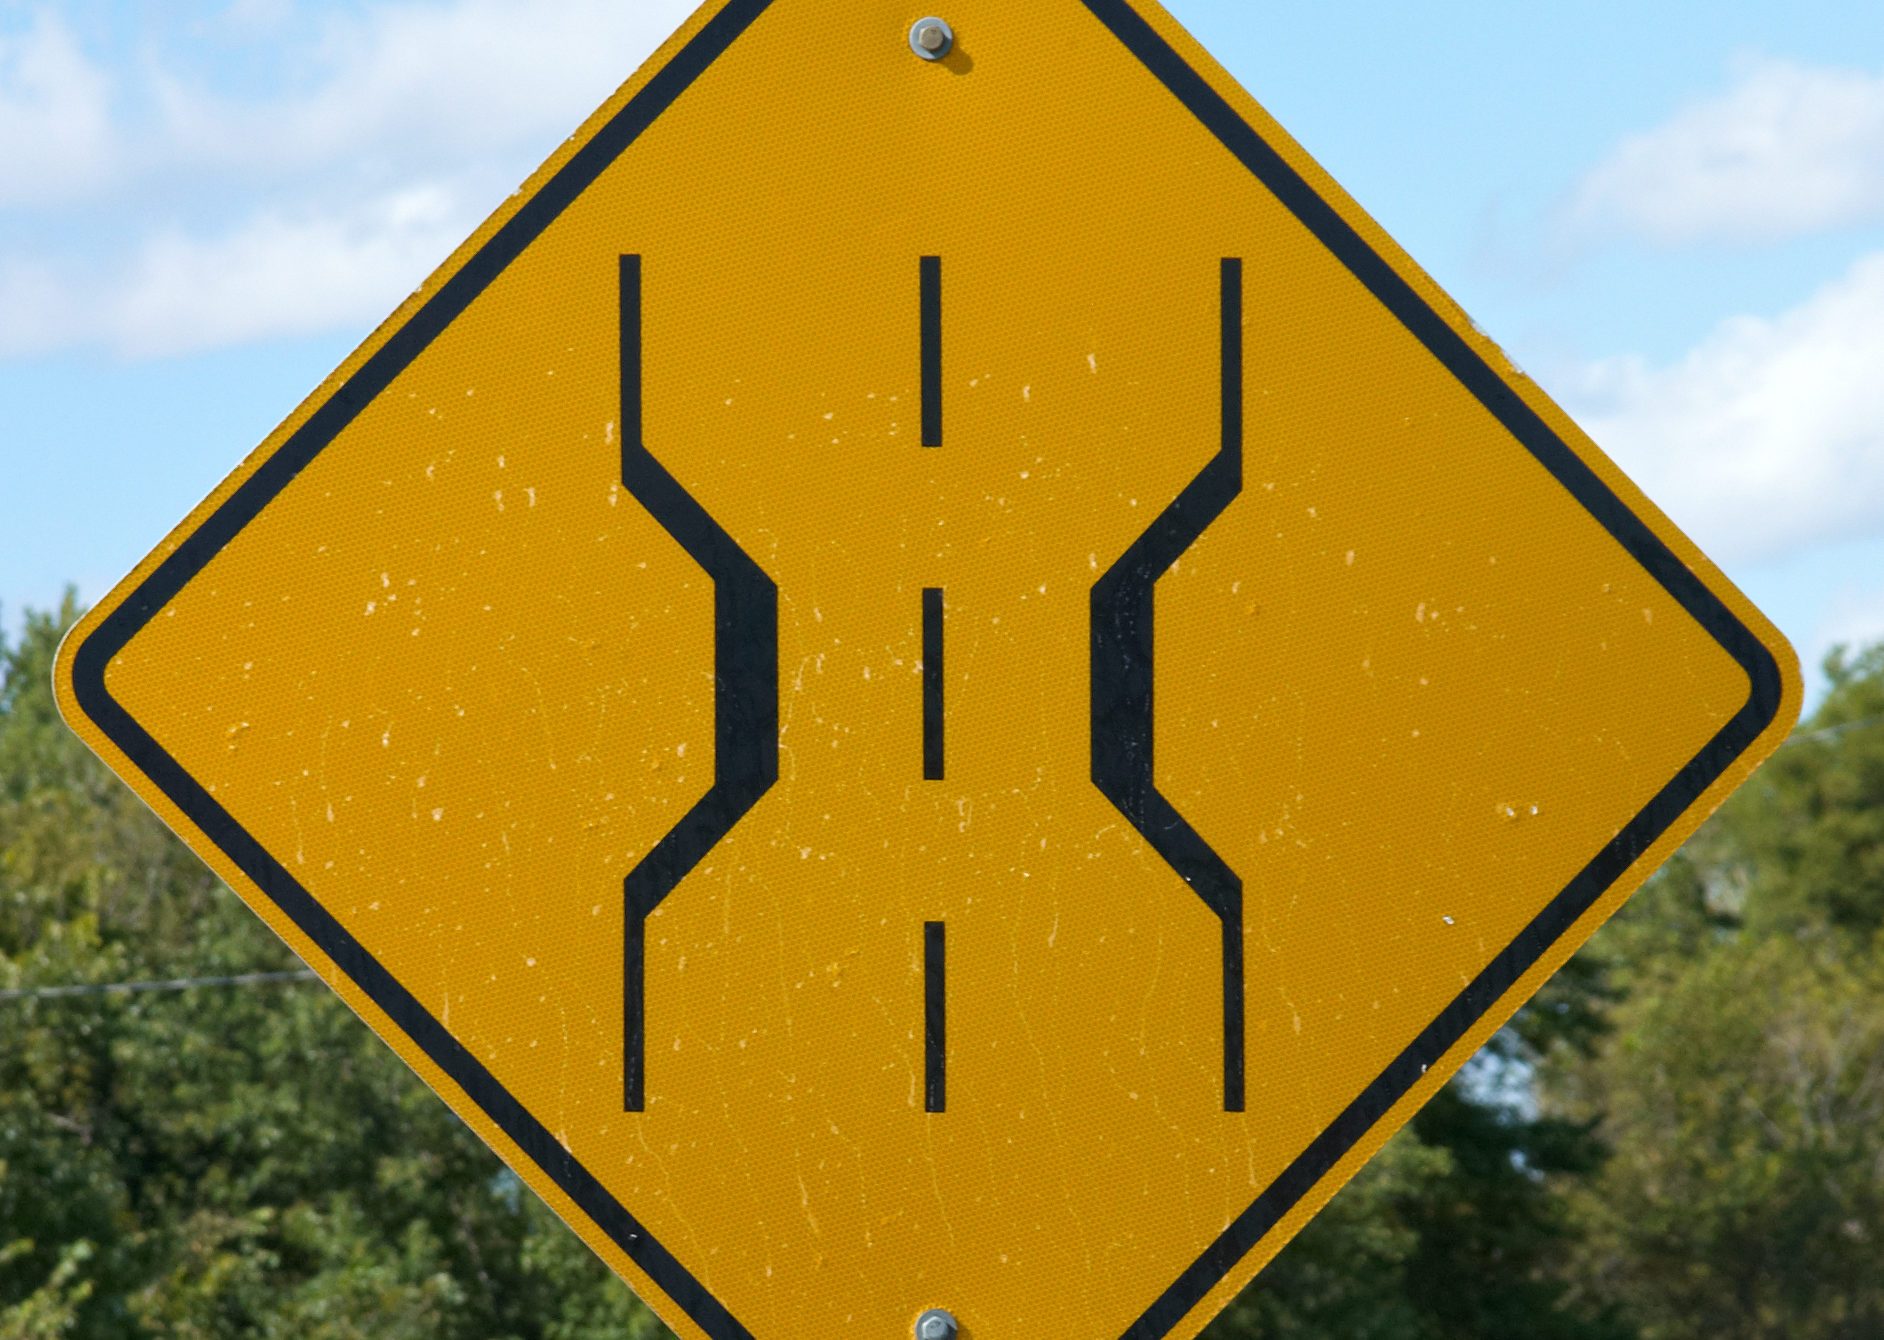 8 Confusing Road Signs That Even Driving School Instructors Get Wrong